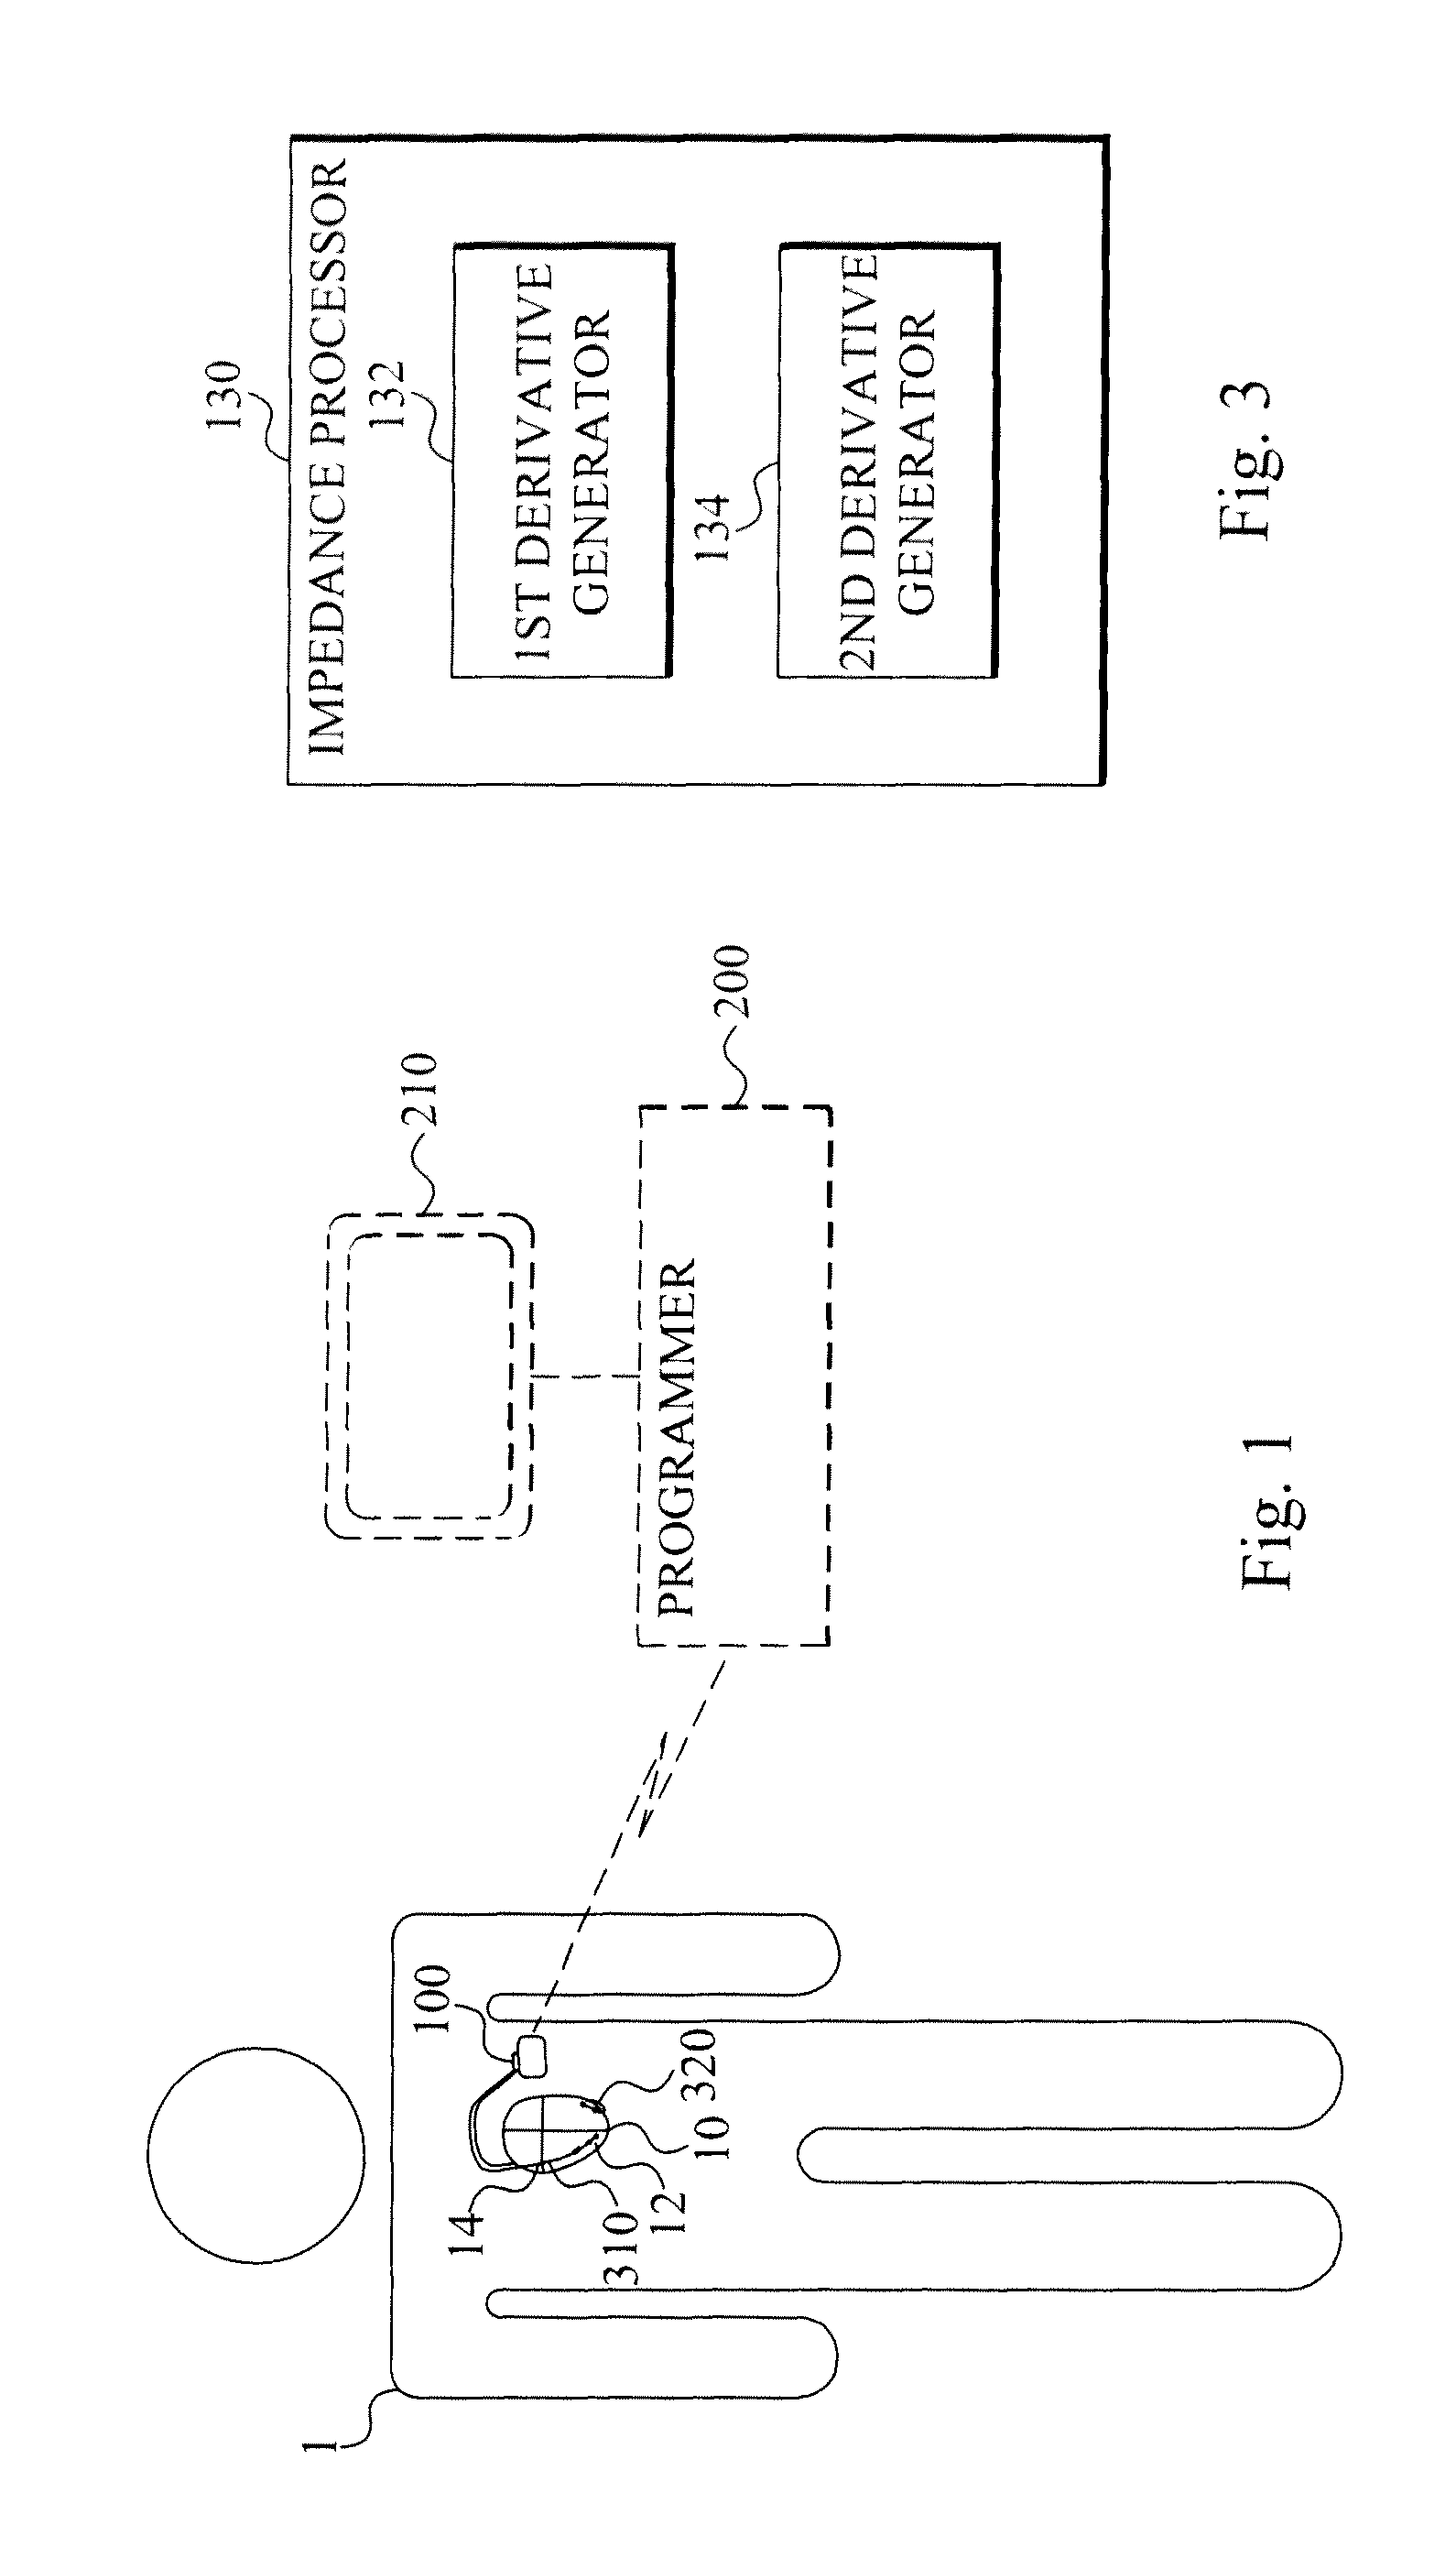 Method and device for estimating a myocardial performance parameter